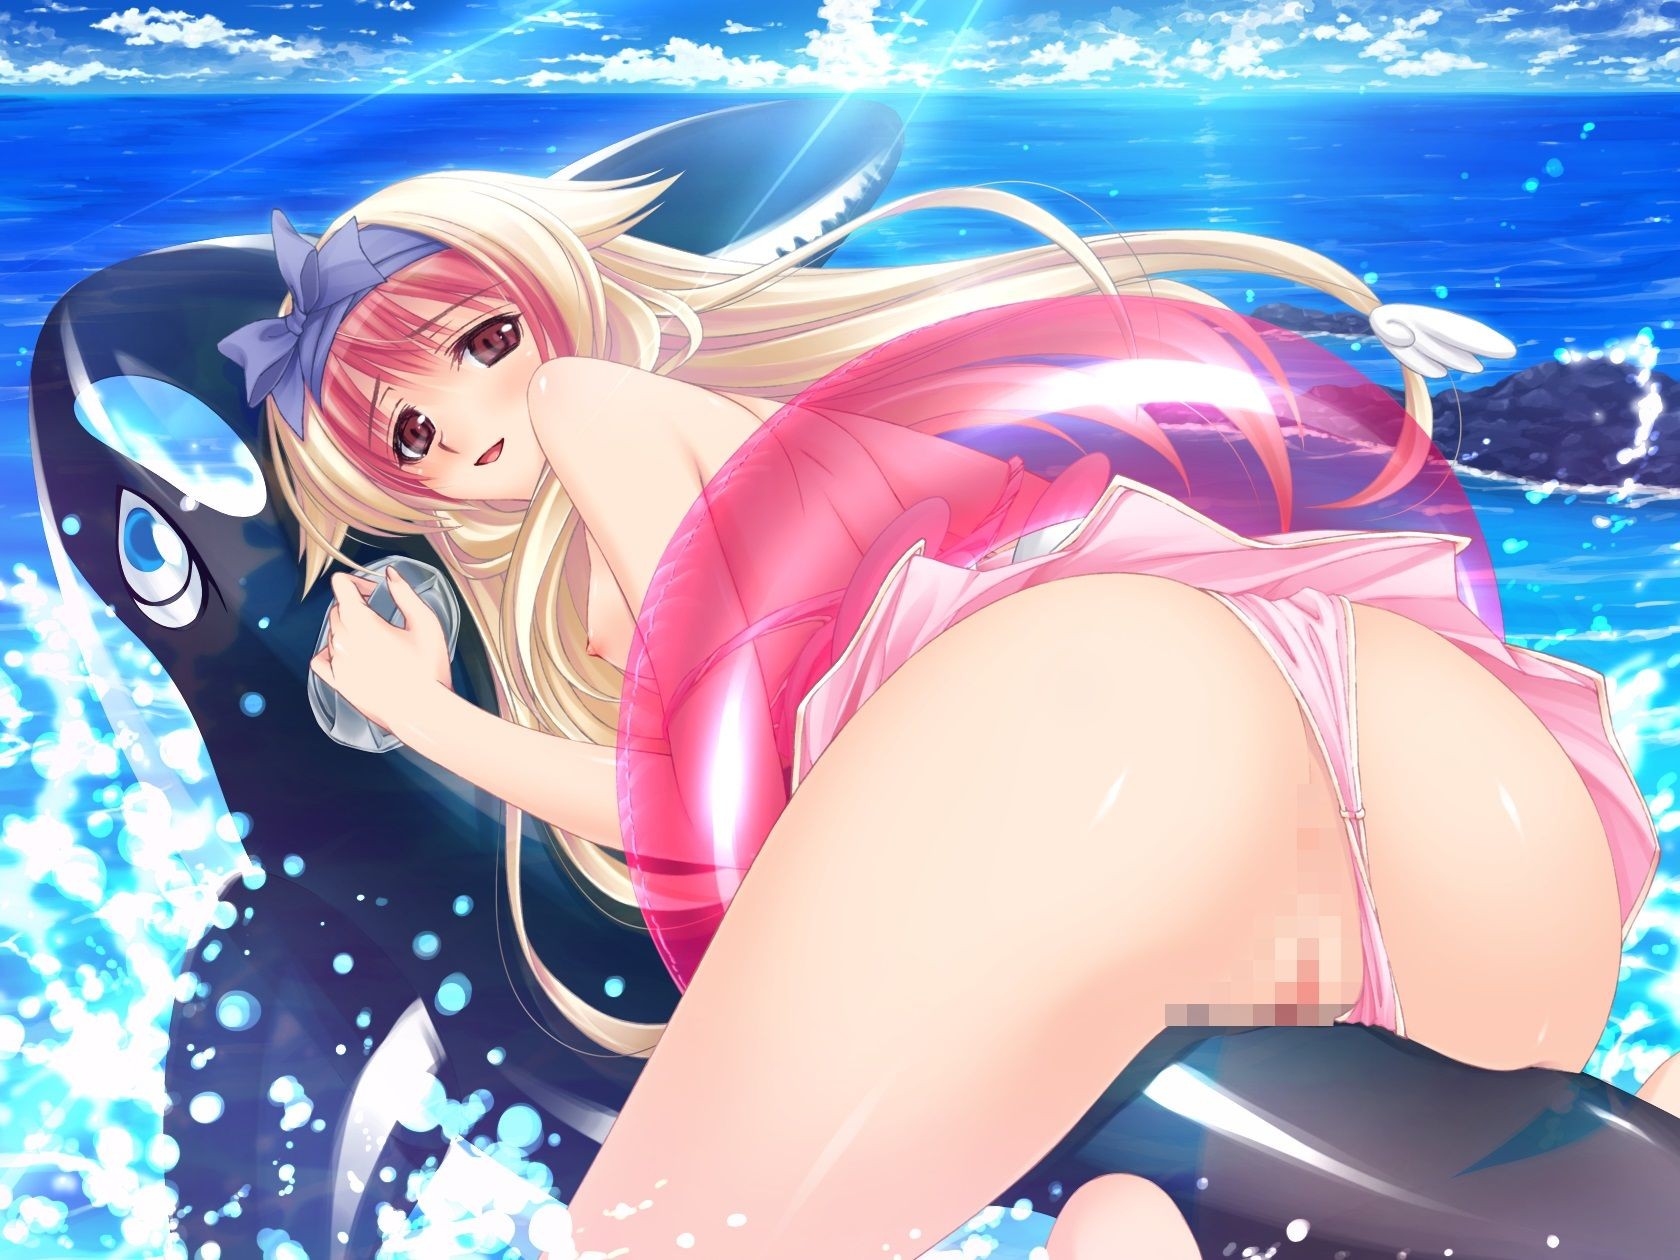 Making Love Porn Management - Call-[18 PC Anime Games Wallpapers And Pictures Part 1 Porra